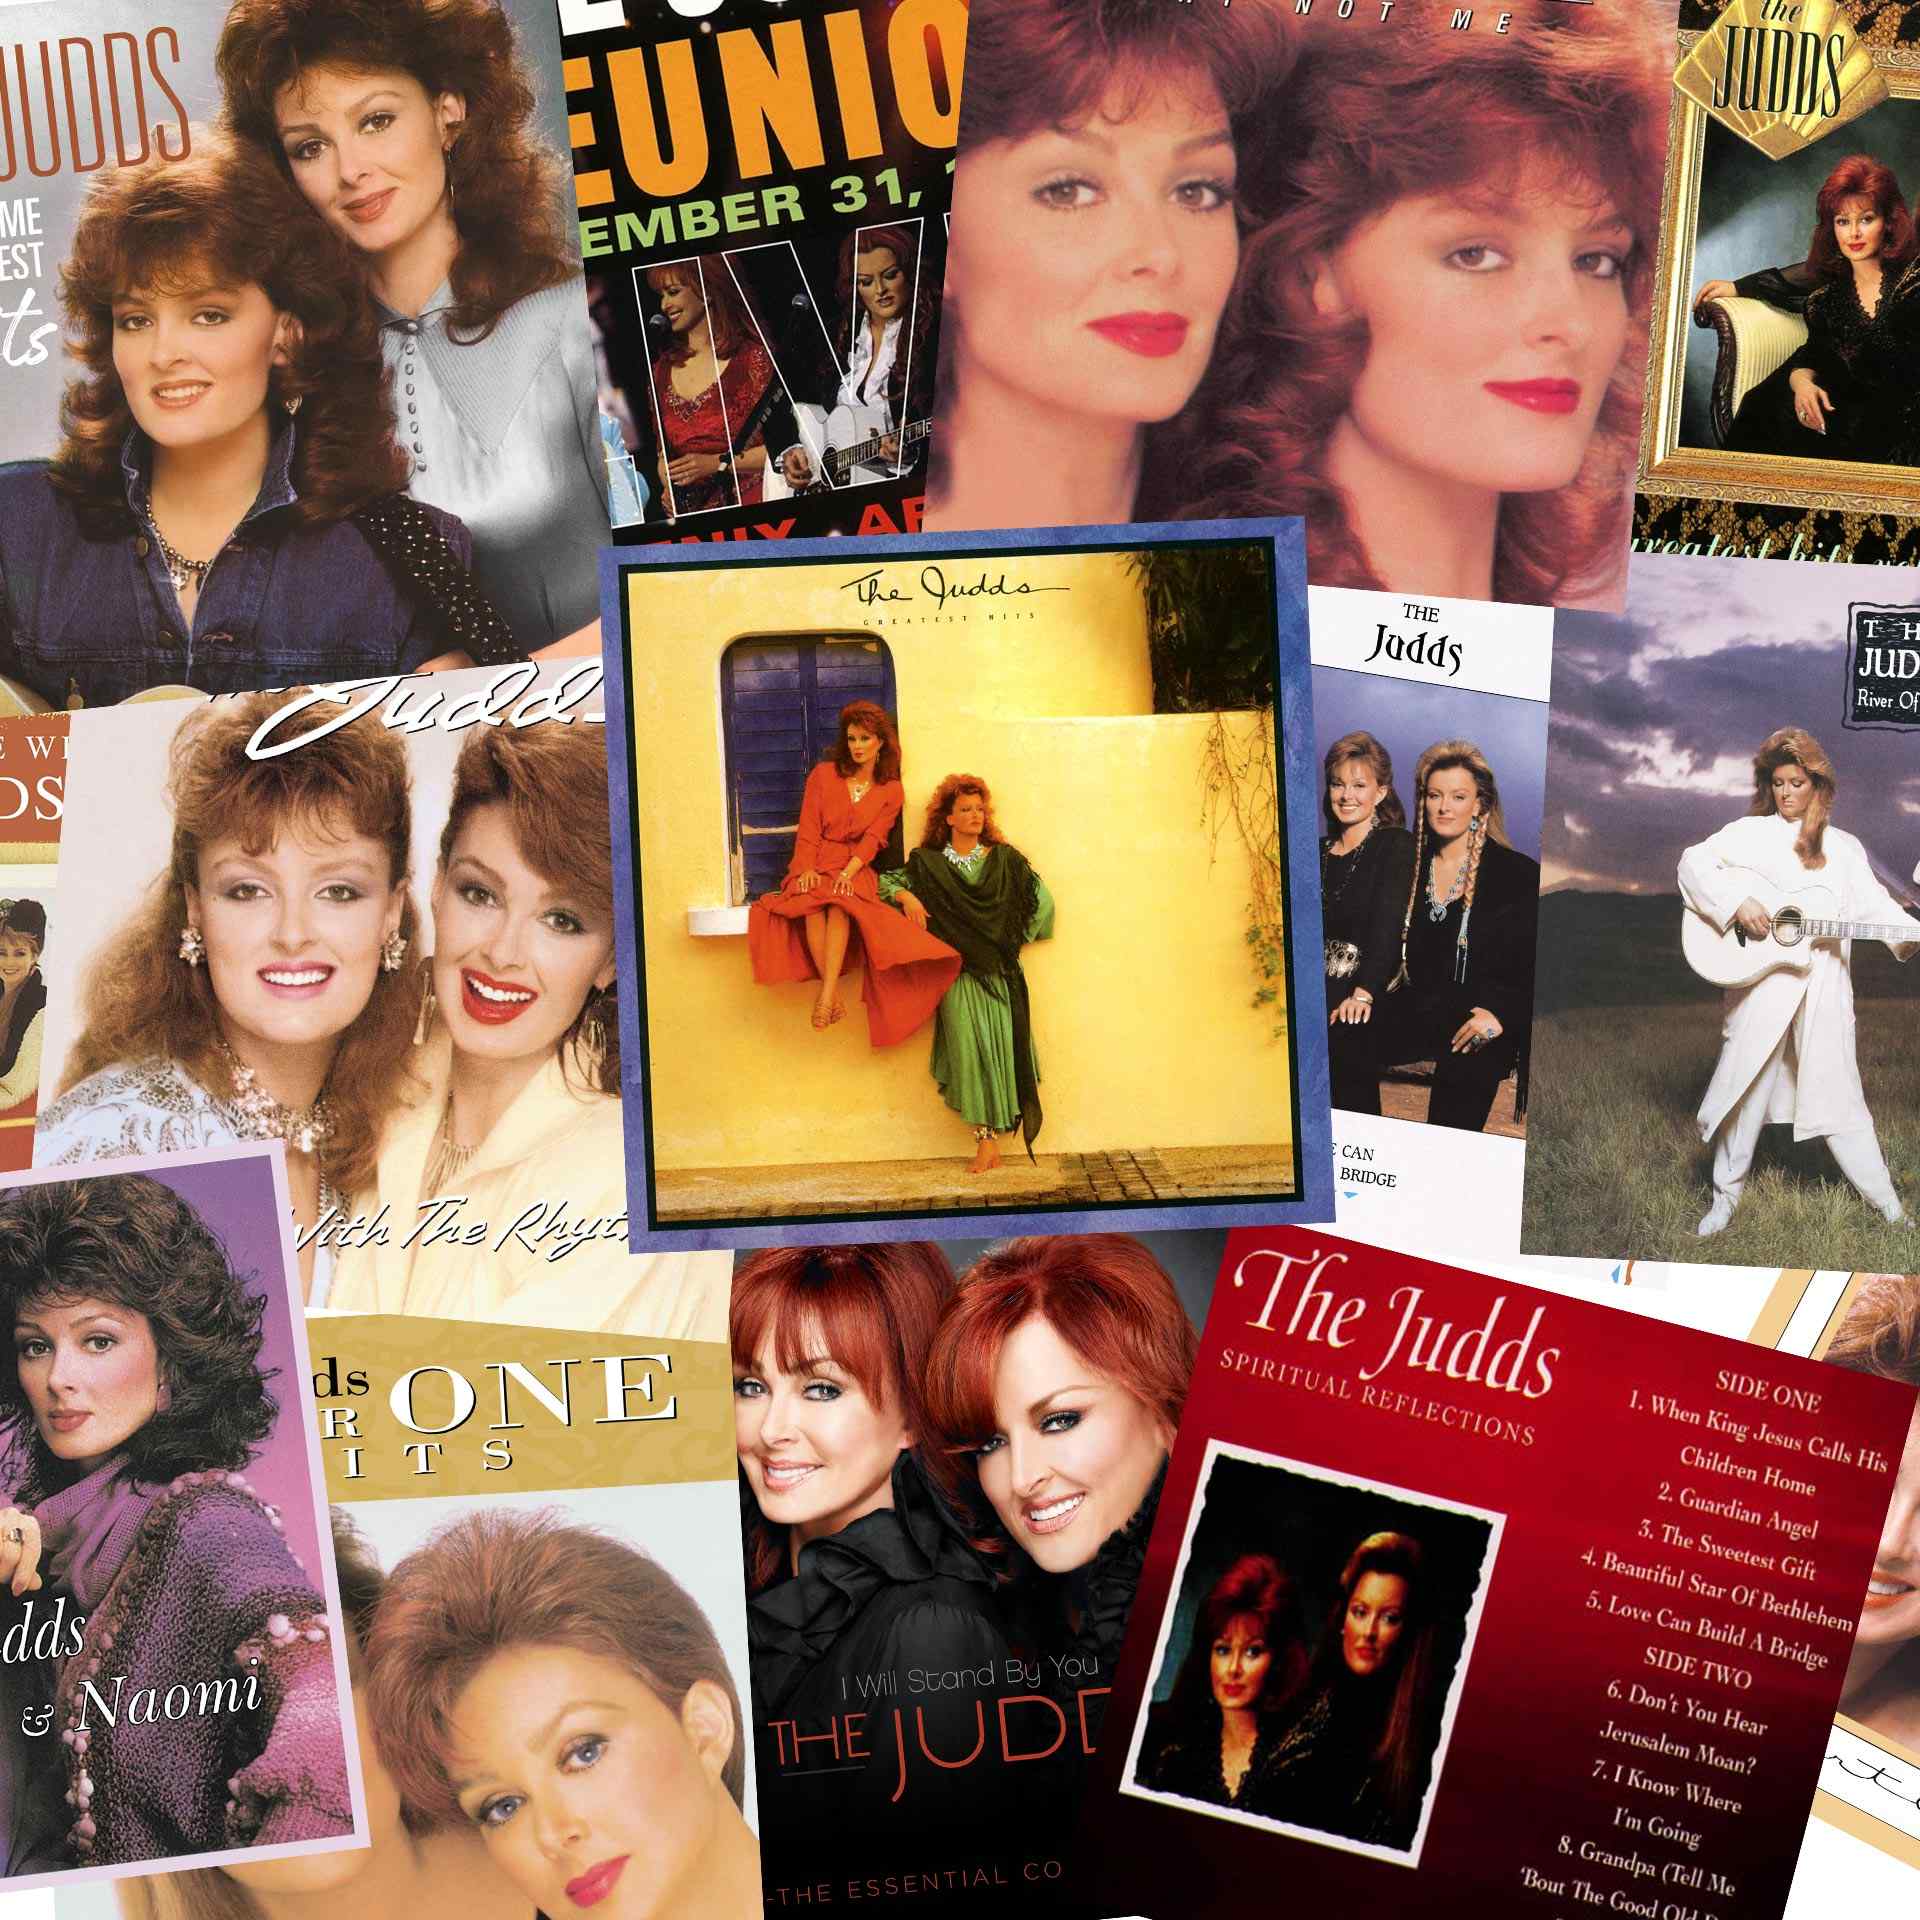 About The Judds